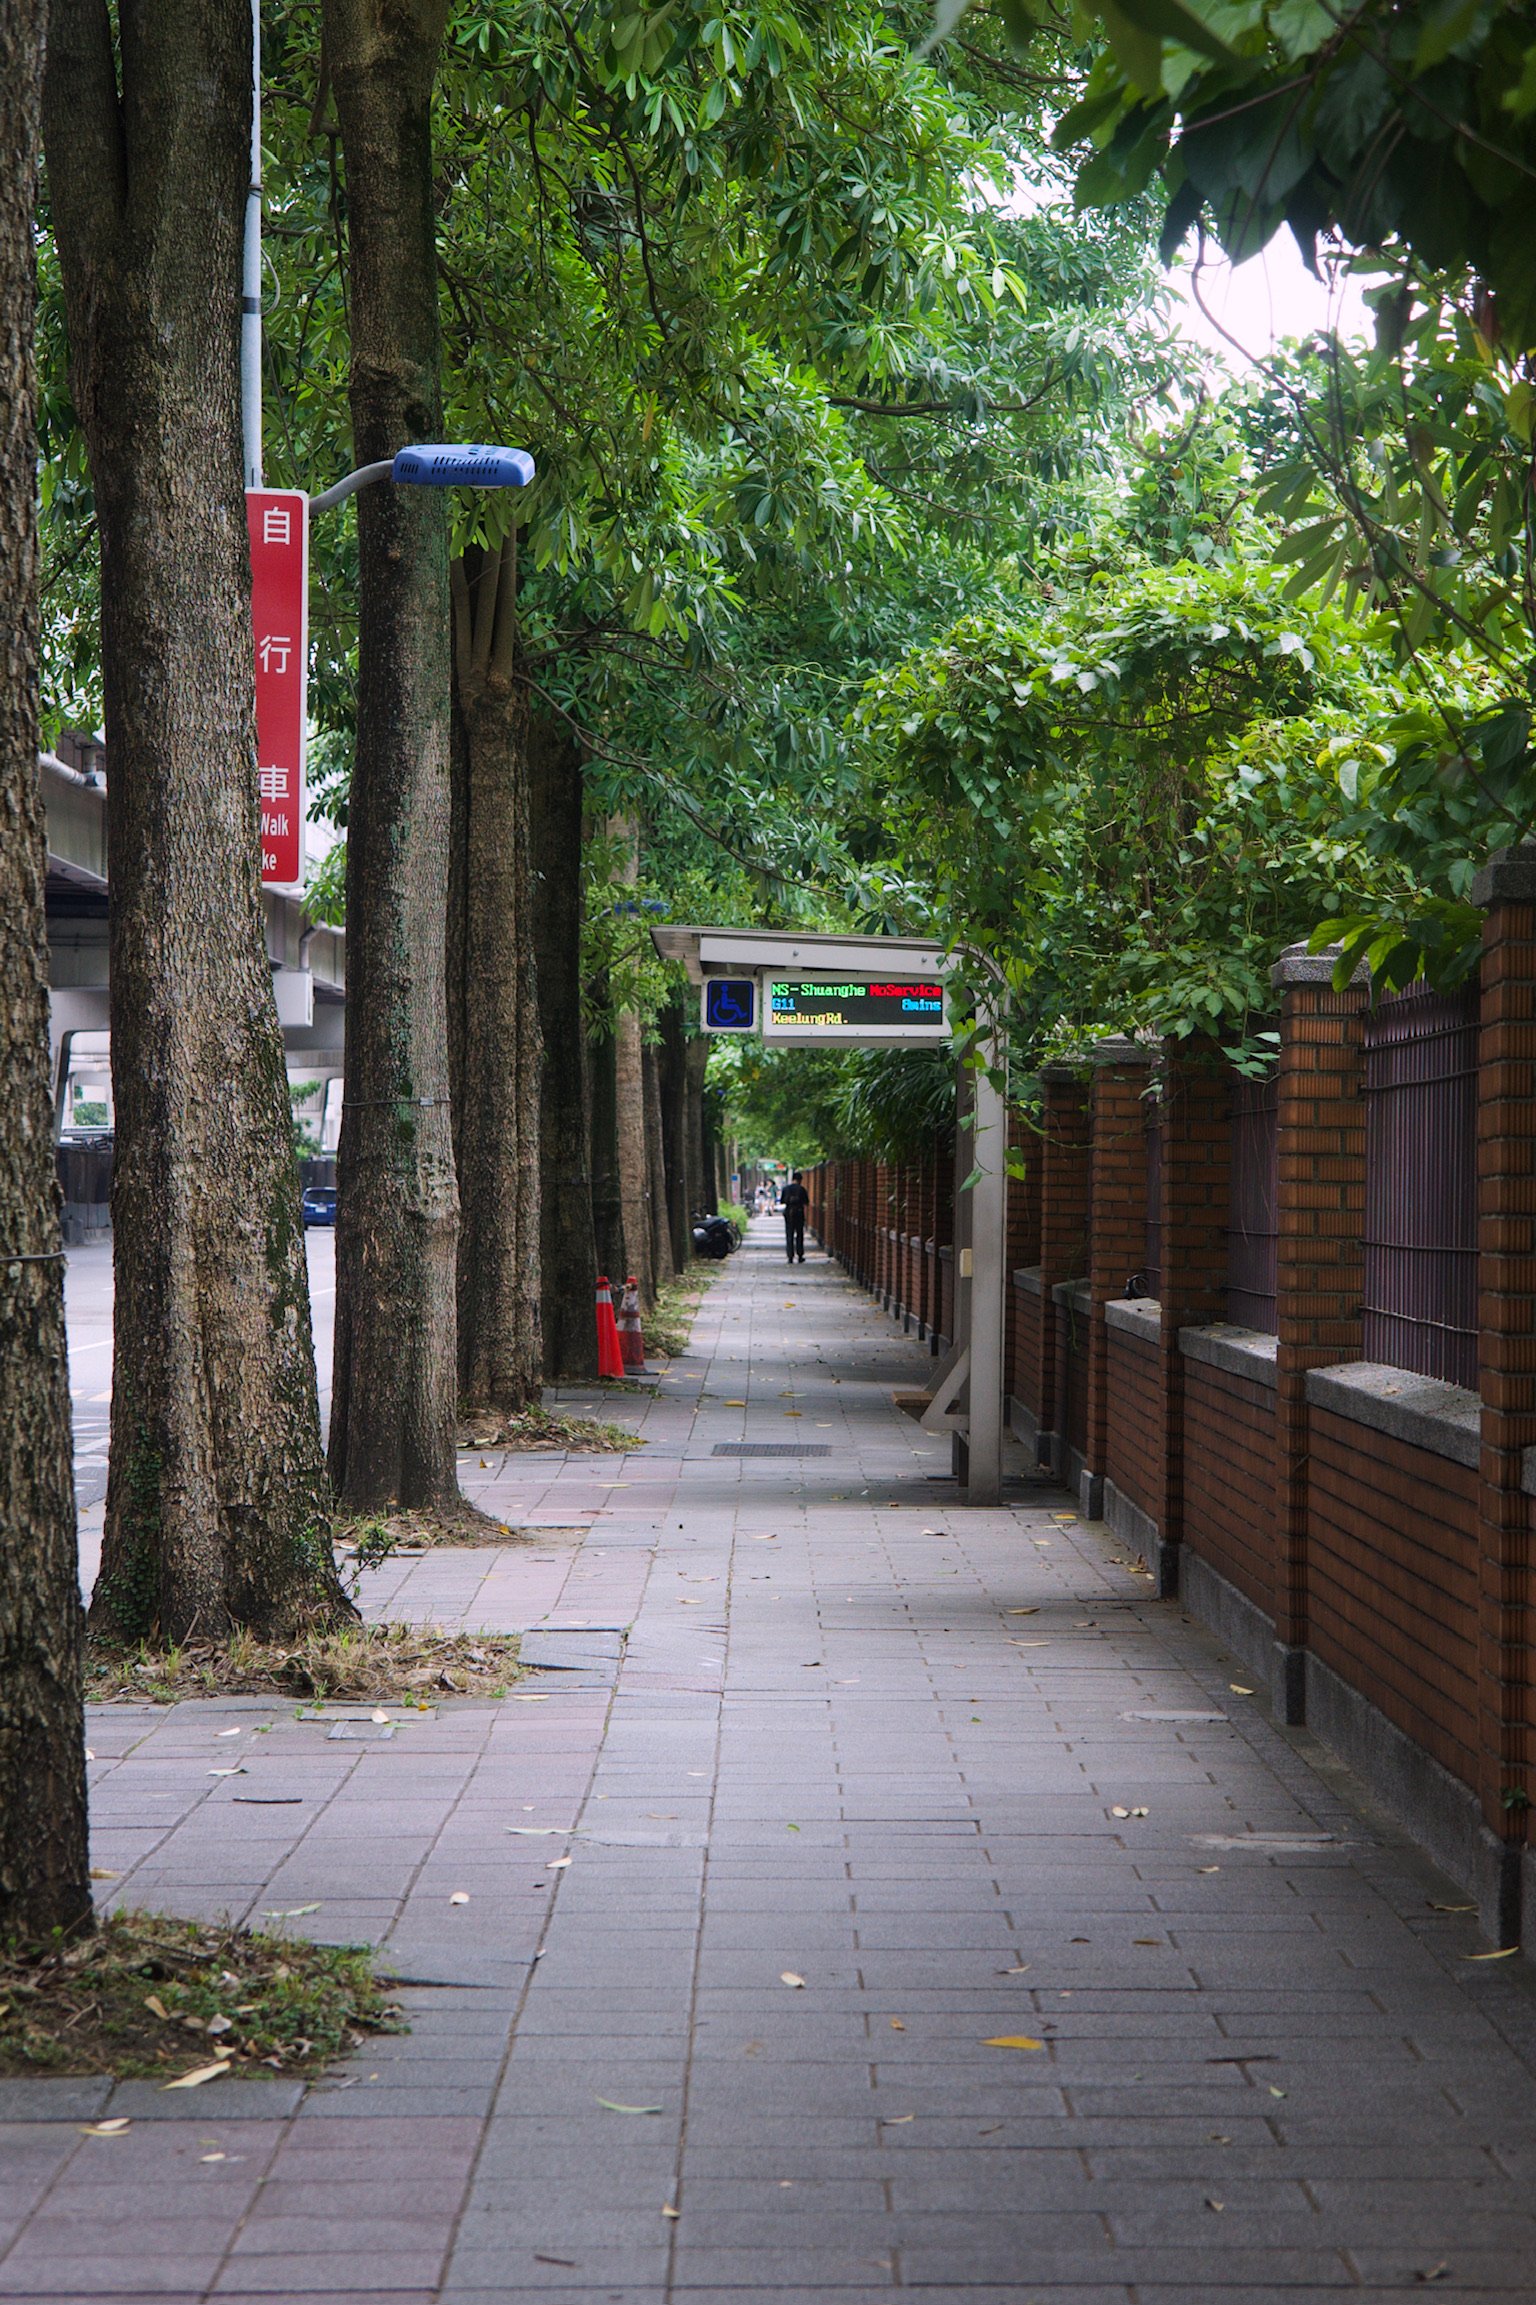 A sidewalk with trees and a bus stop.